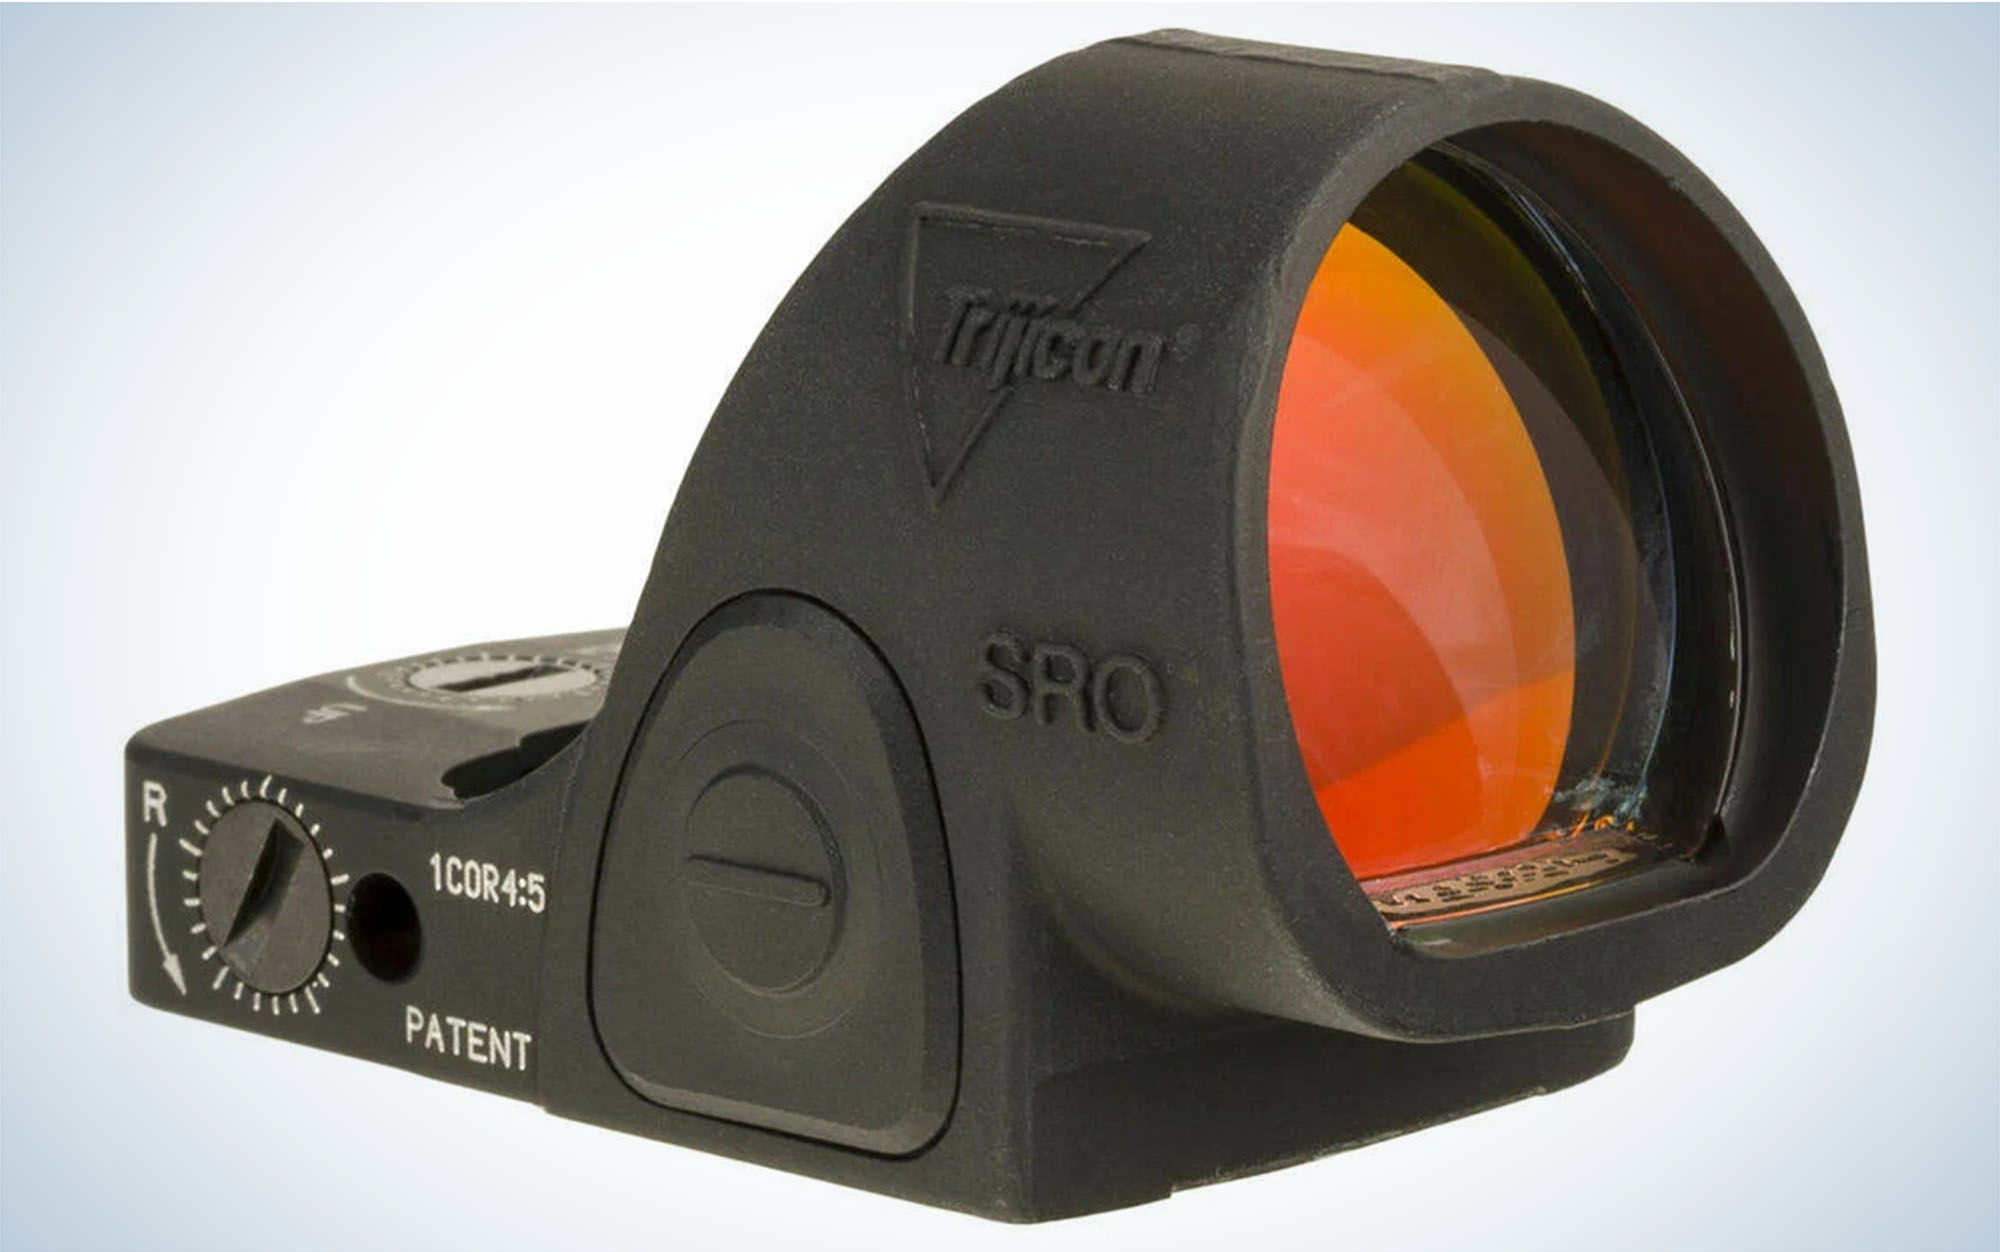 The Trijicon SRO is the best red dot sight for fast shots.